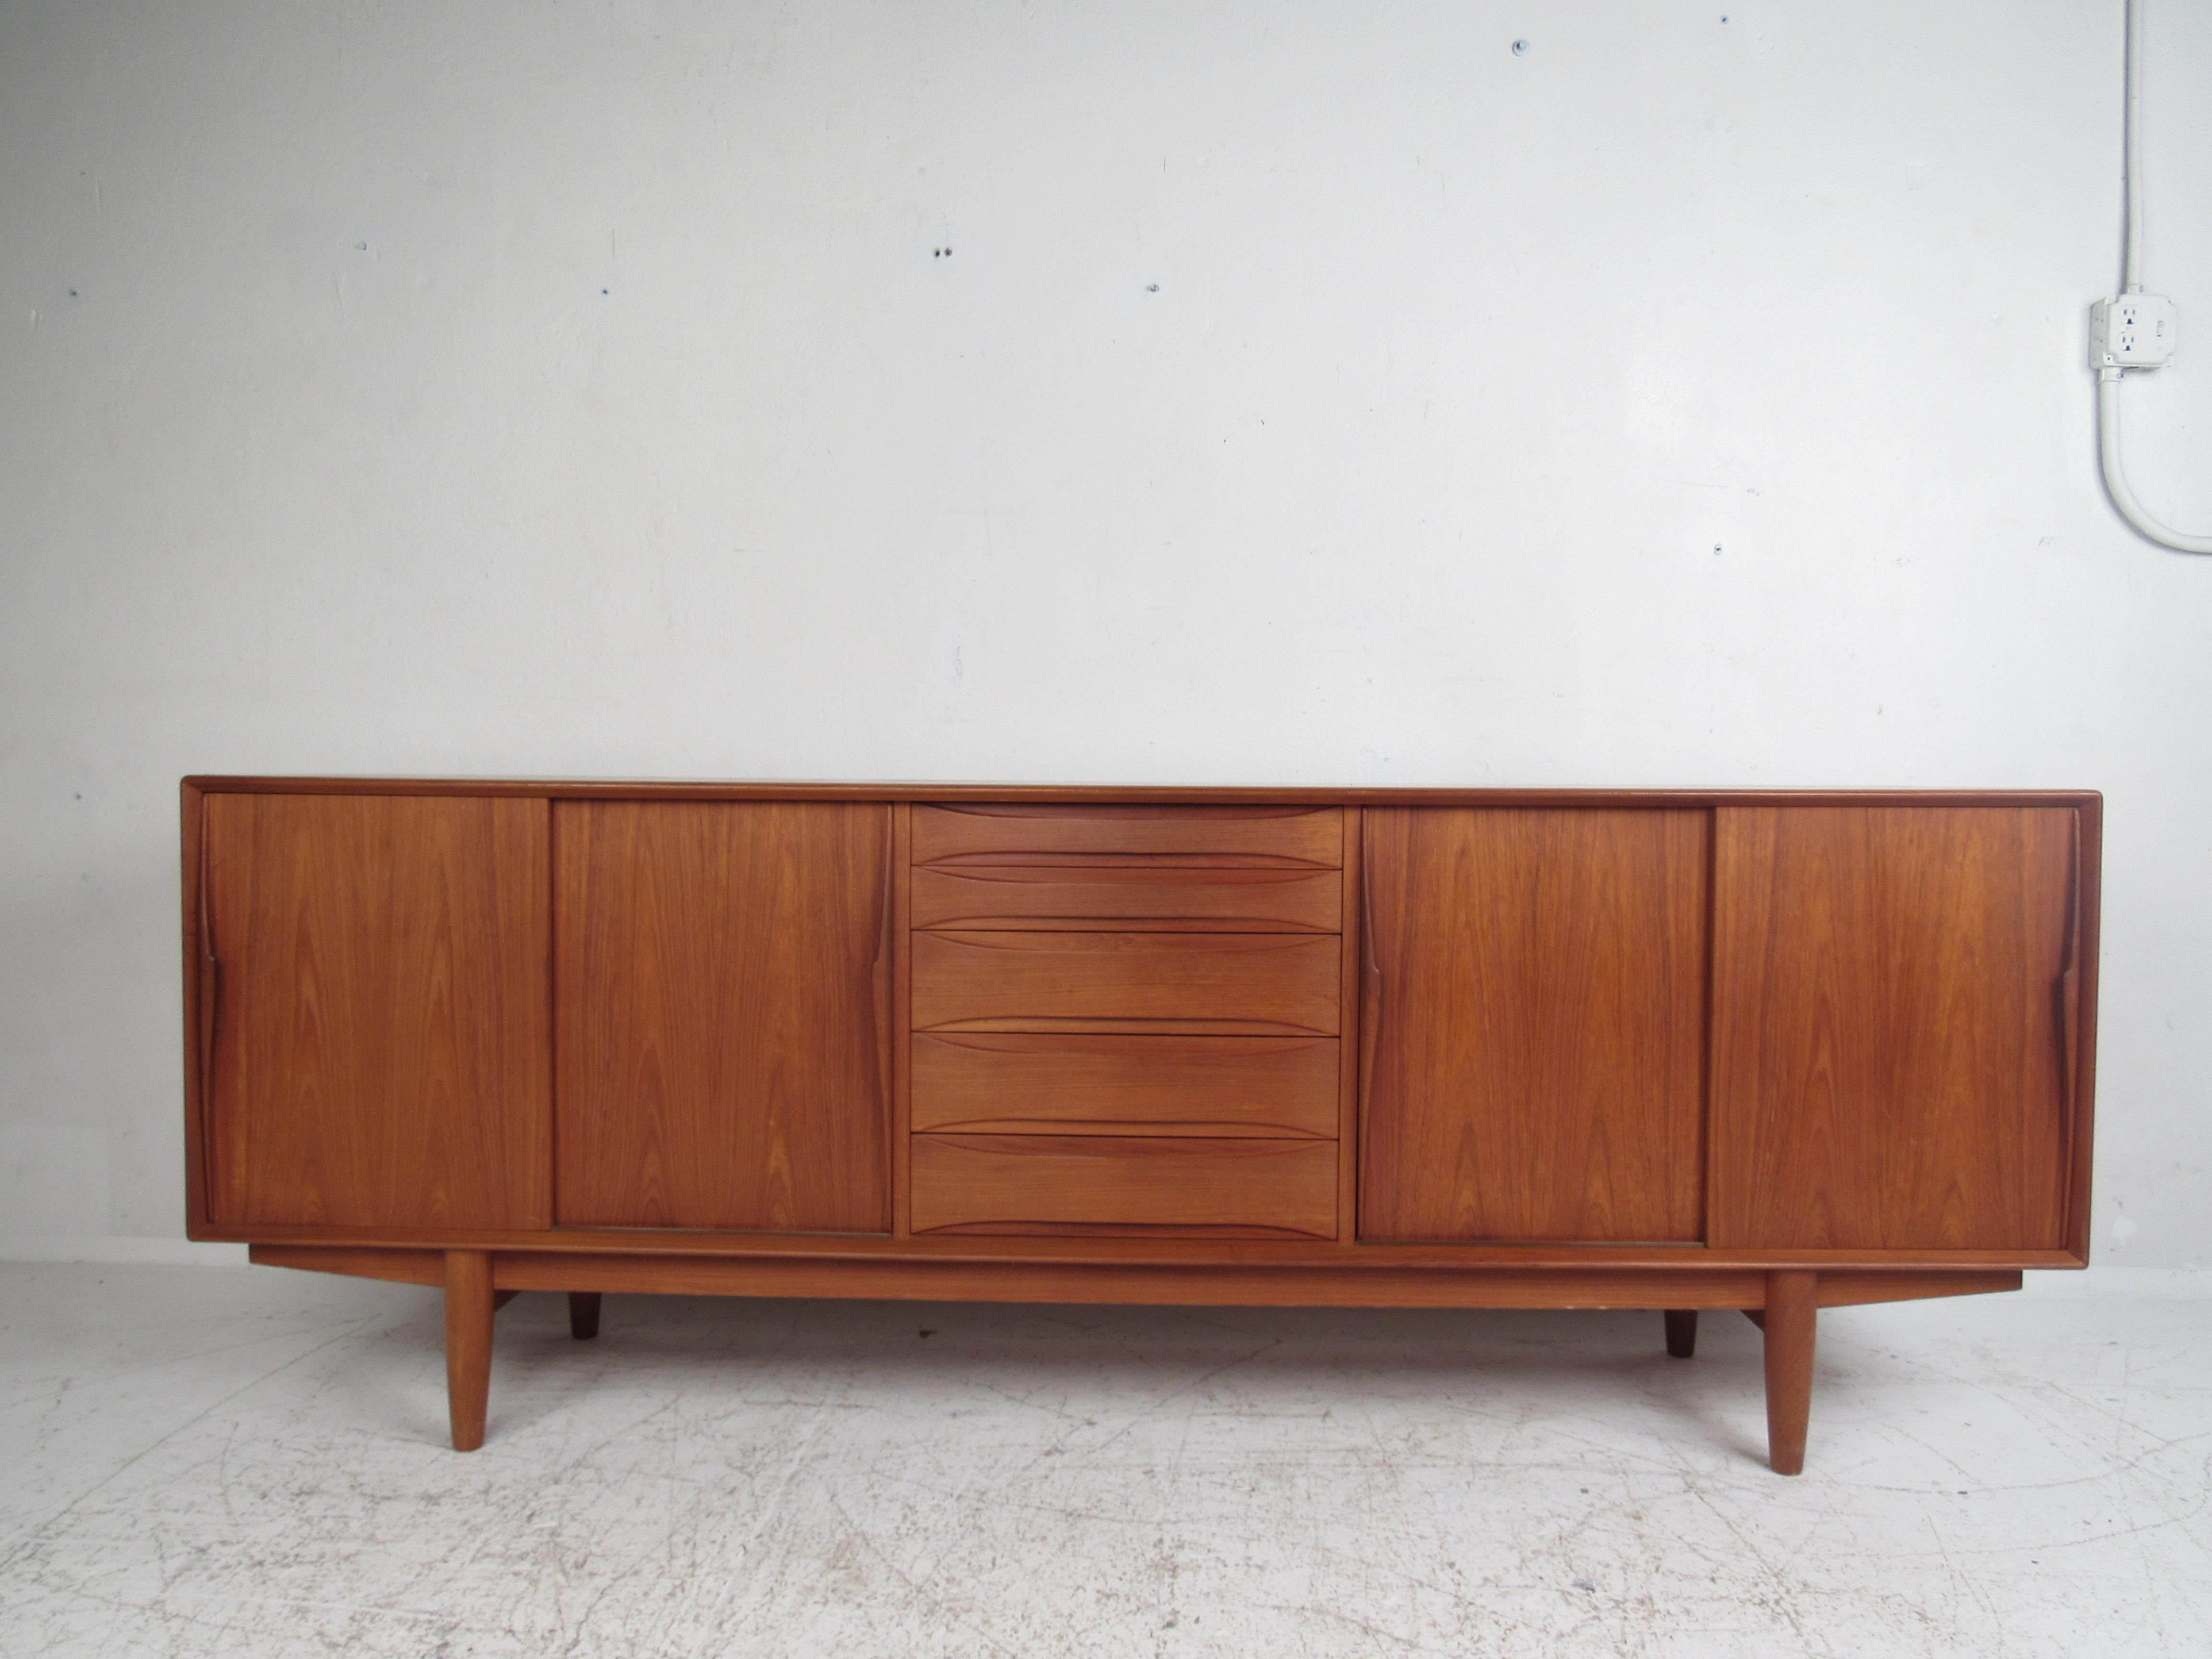 This stunning vintage modern sideboard features oval recessed drawer pulls and convenient sculpted door handles. A sleek design that offers plenty of room for storage within its many drawers and large compartments hidden by sliding doors. The rich